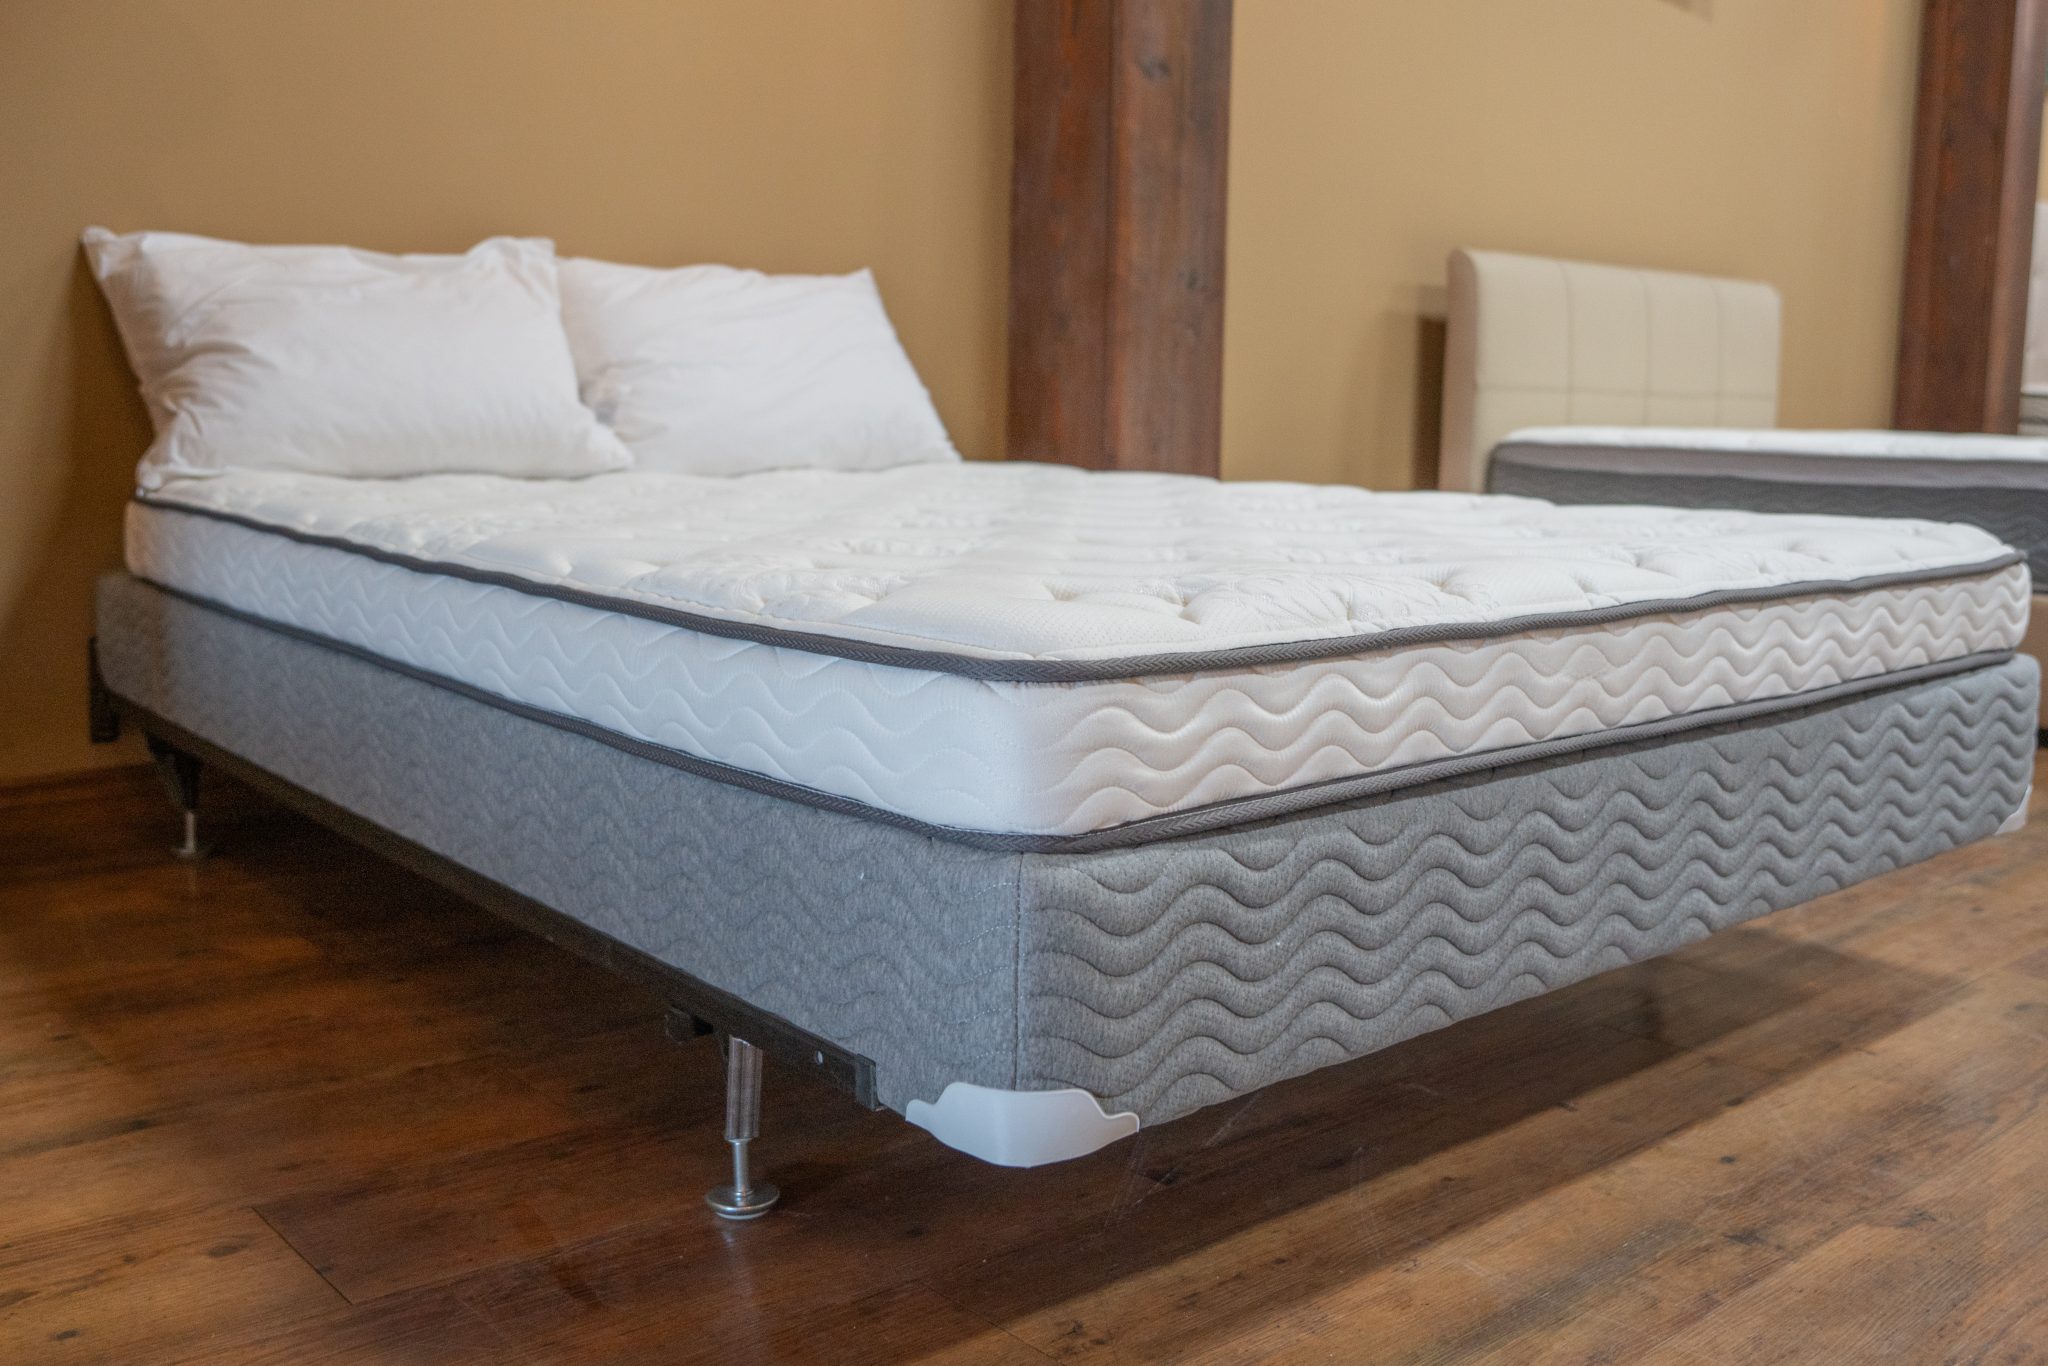 replacement mattress for fold out bed